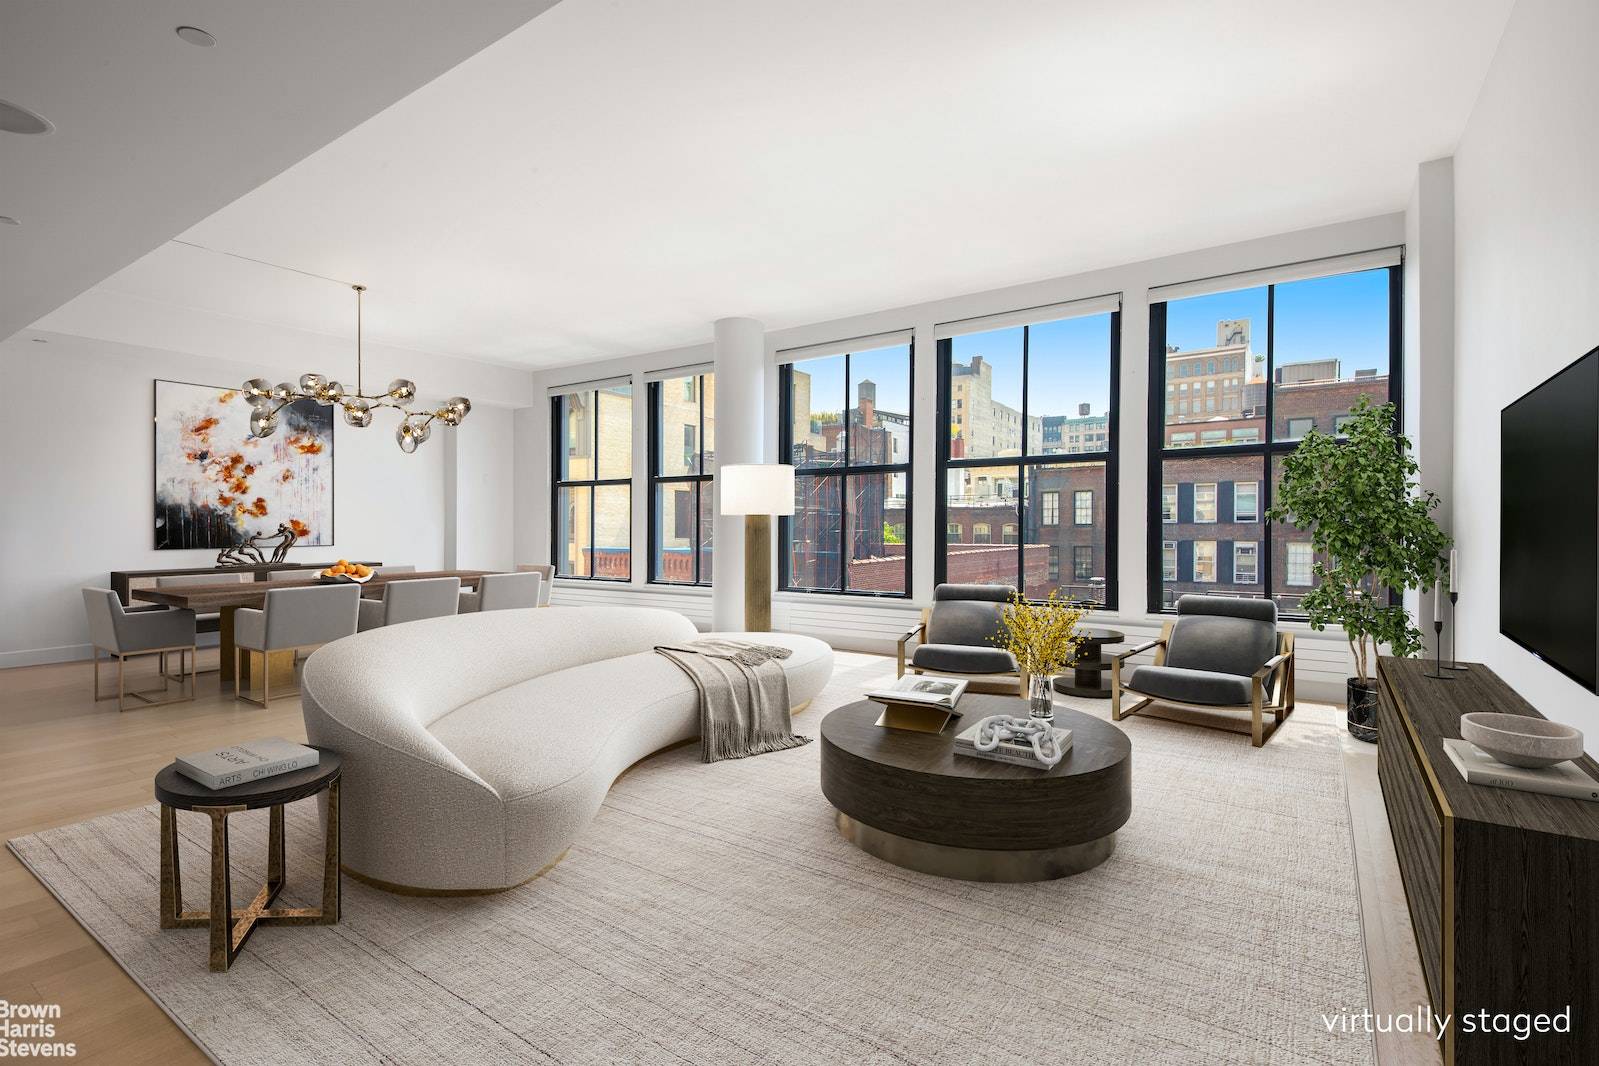 Trophy 4 BR Penthouse in Full Service BuildingSponsor Unit with No Board Approval Required Welcome to this unparalleled 4 bedroom, 4 bathroom trophy penthouse located in the heart of SoHo ...